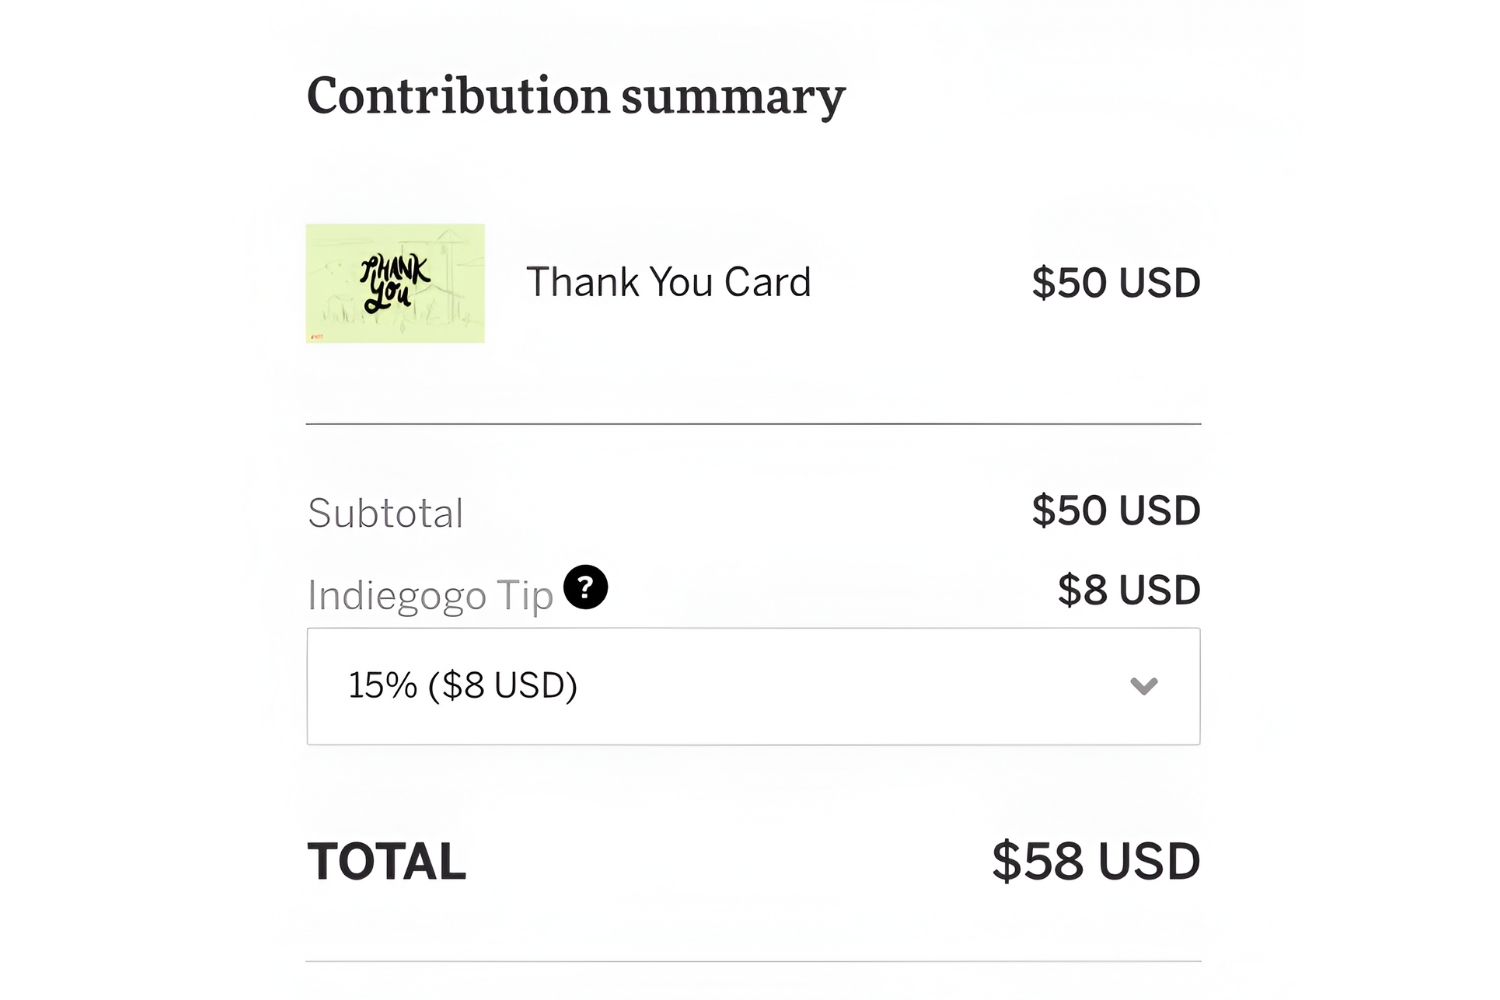 When Will Indiegogo Charge My Account?